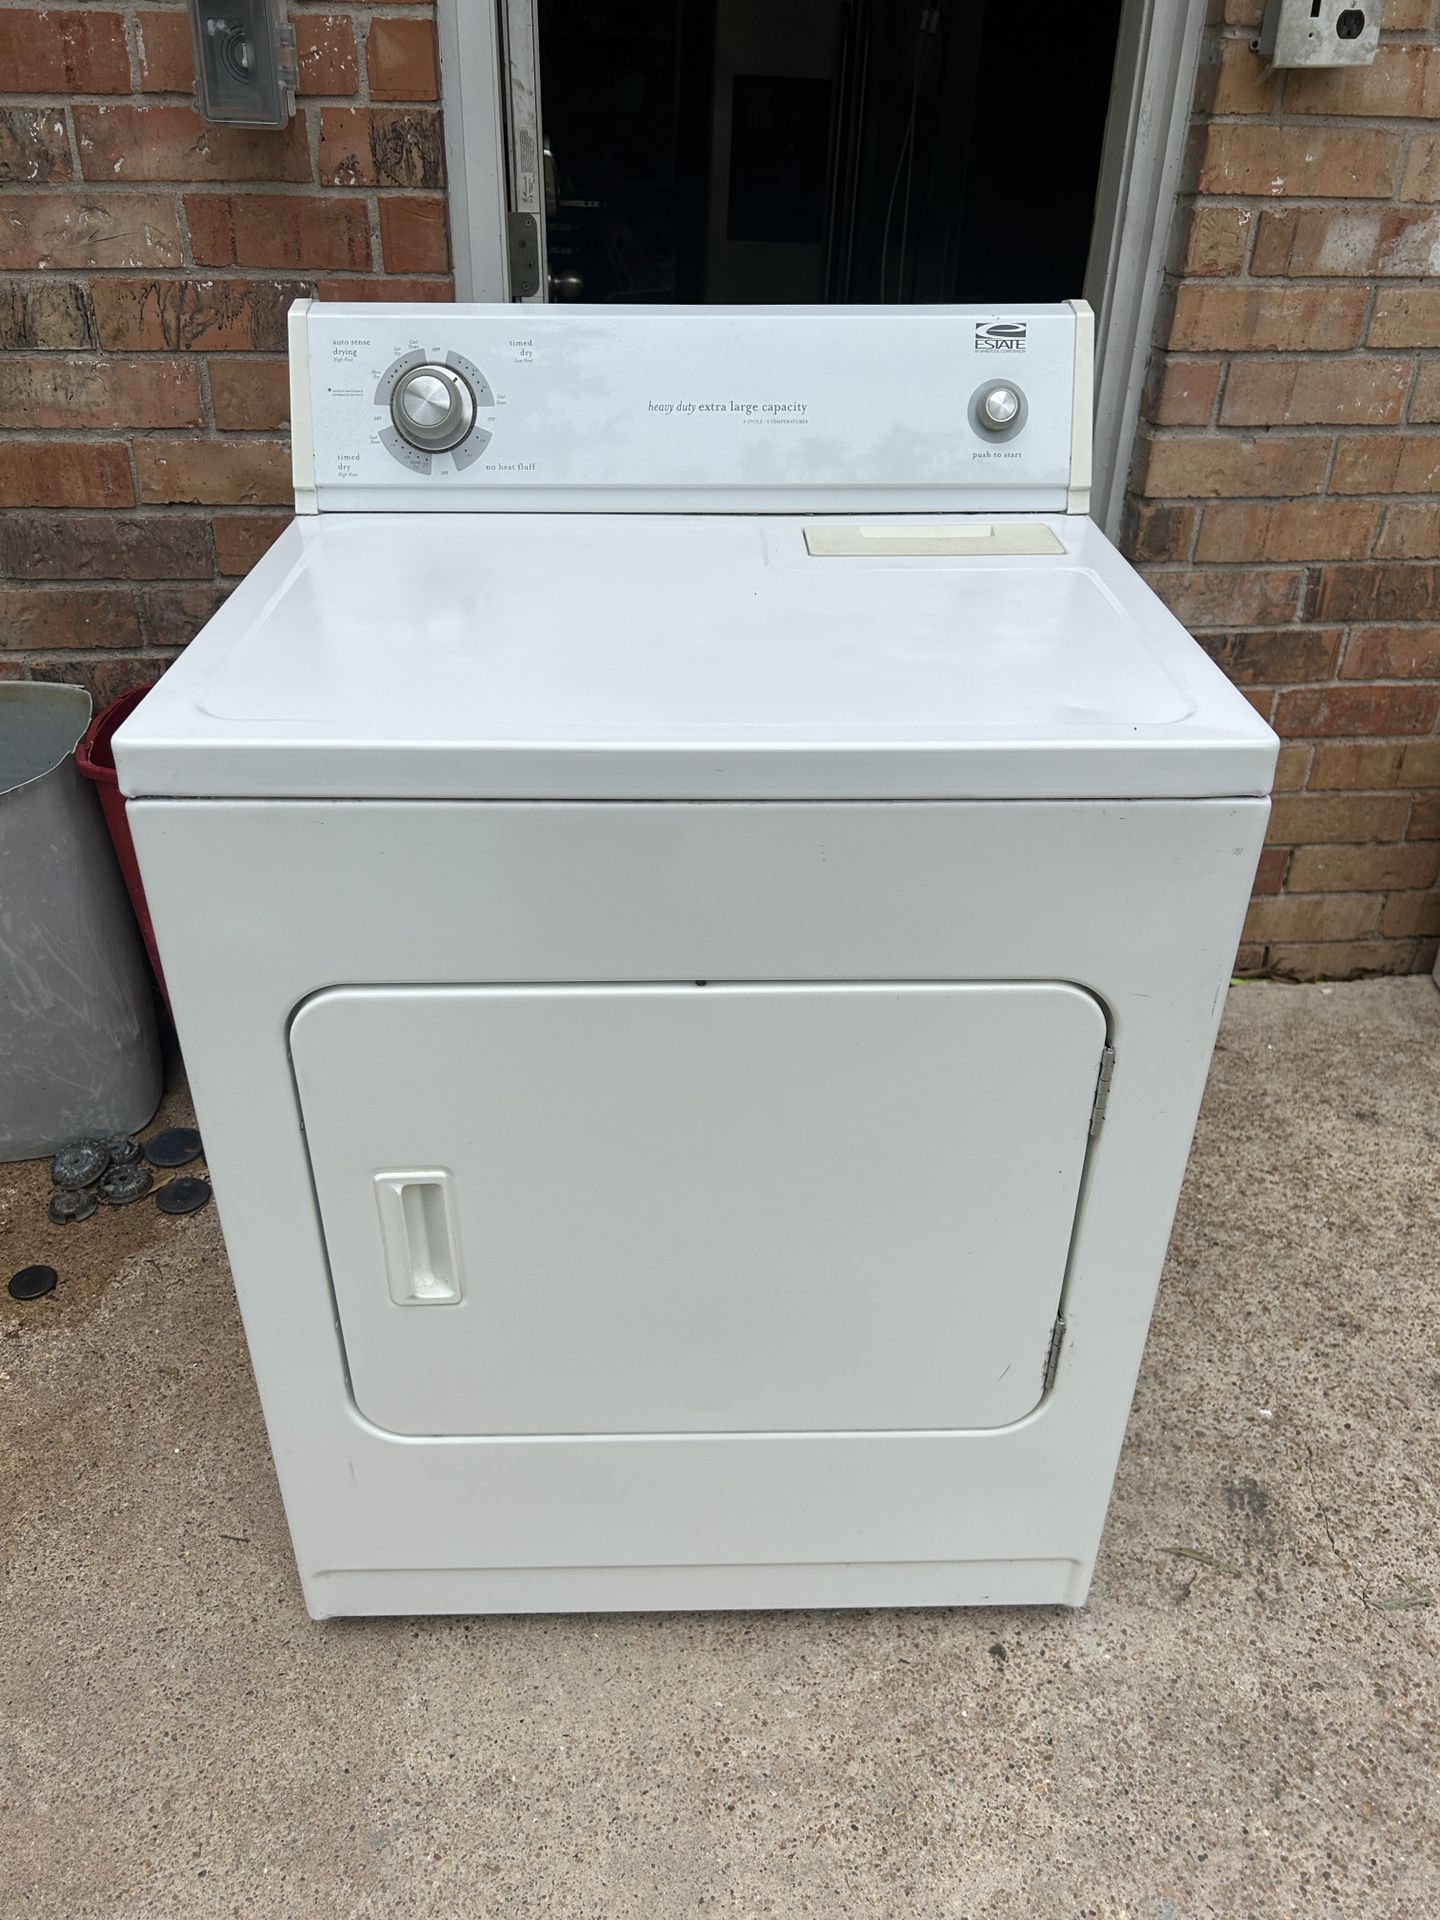 WHIRLPOOL STATE ELECTRIC DRYER WORKING GREAT SECADORA ELÉCTRICA